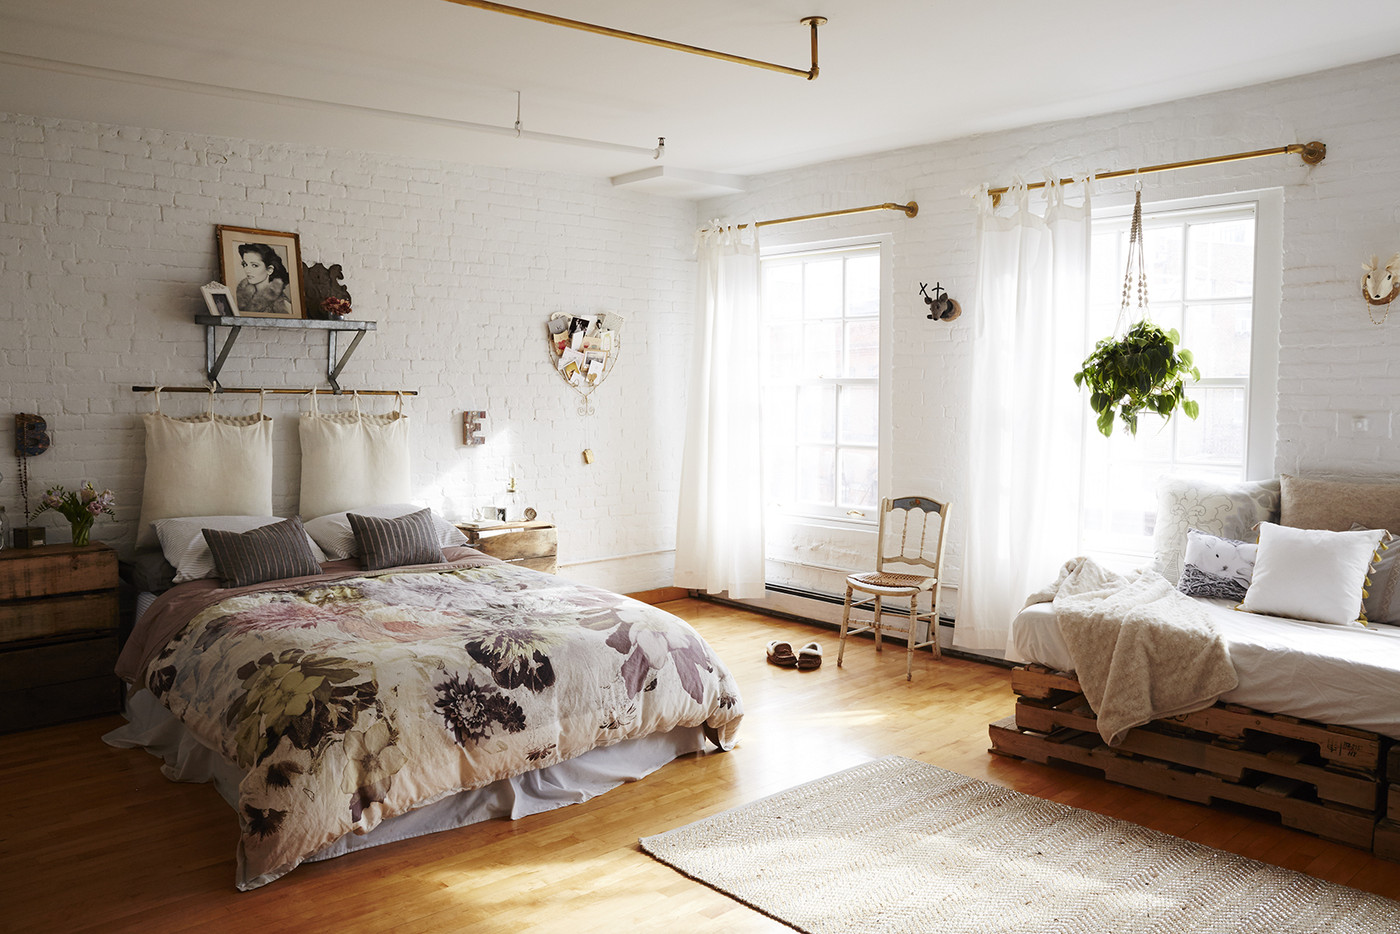 Studio apartment with bed, exposed white brick walls, and a couch made of wooden pallets.